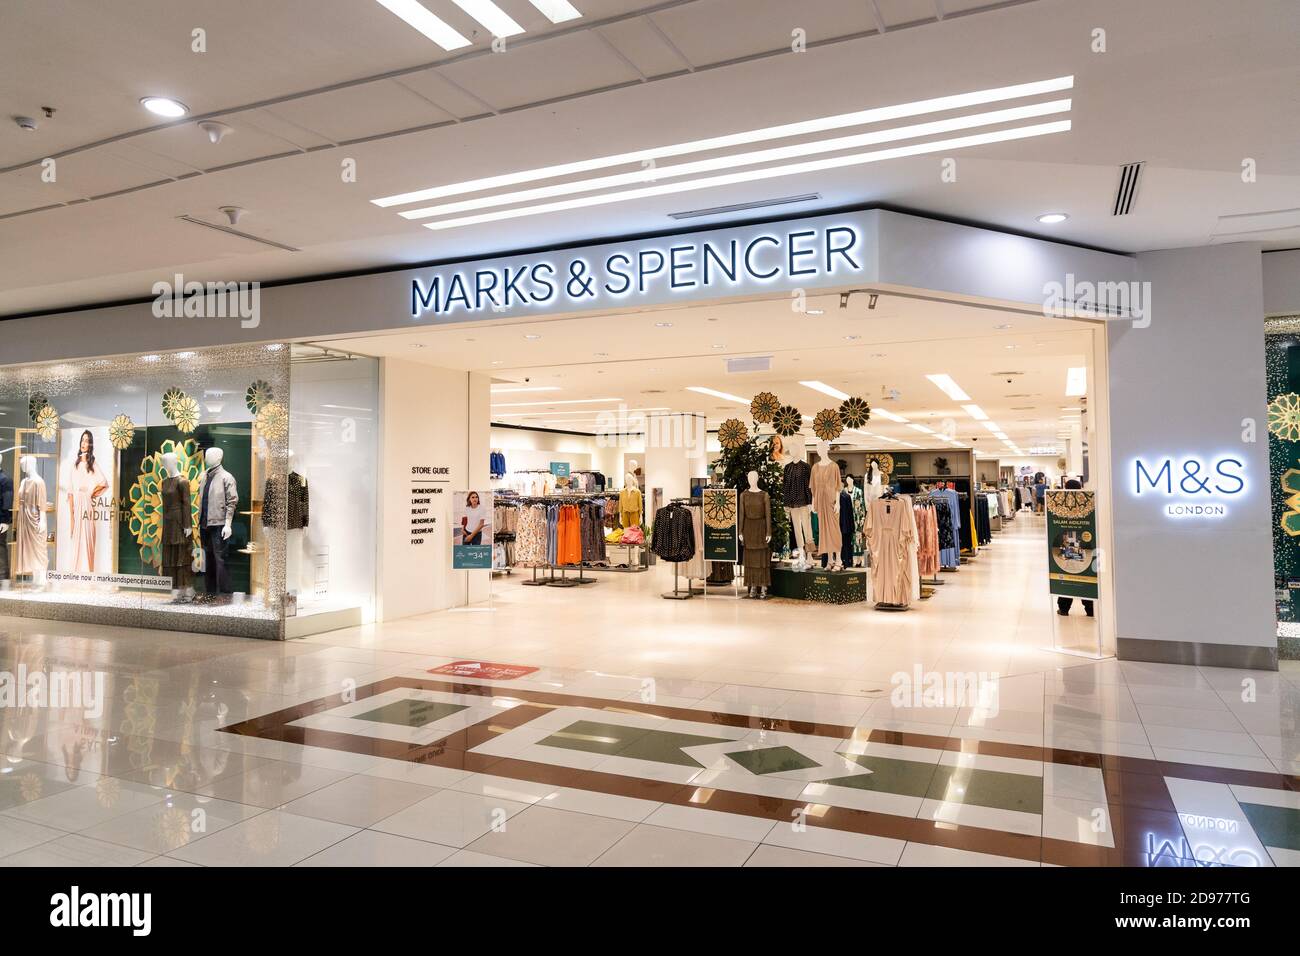 Marks & Spencer Group plc is a major British multinational retailer specialises in selling high quality clothing, home products and food products. Stock Photo